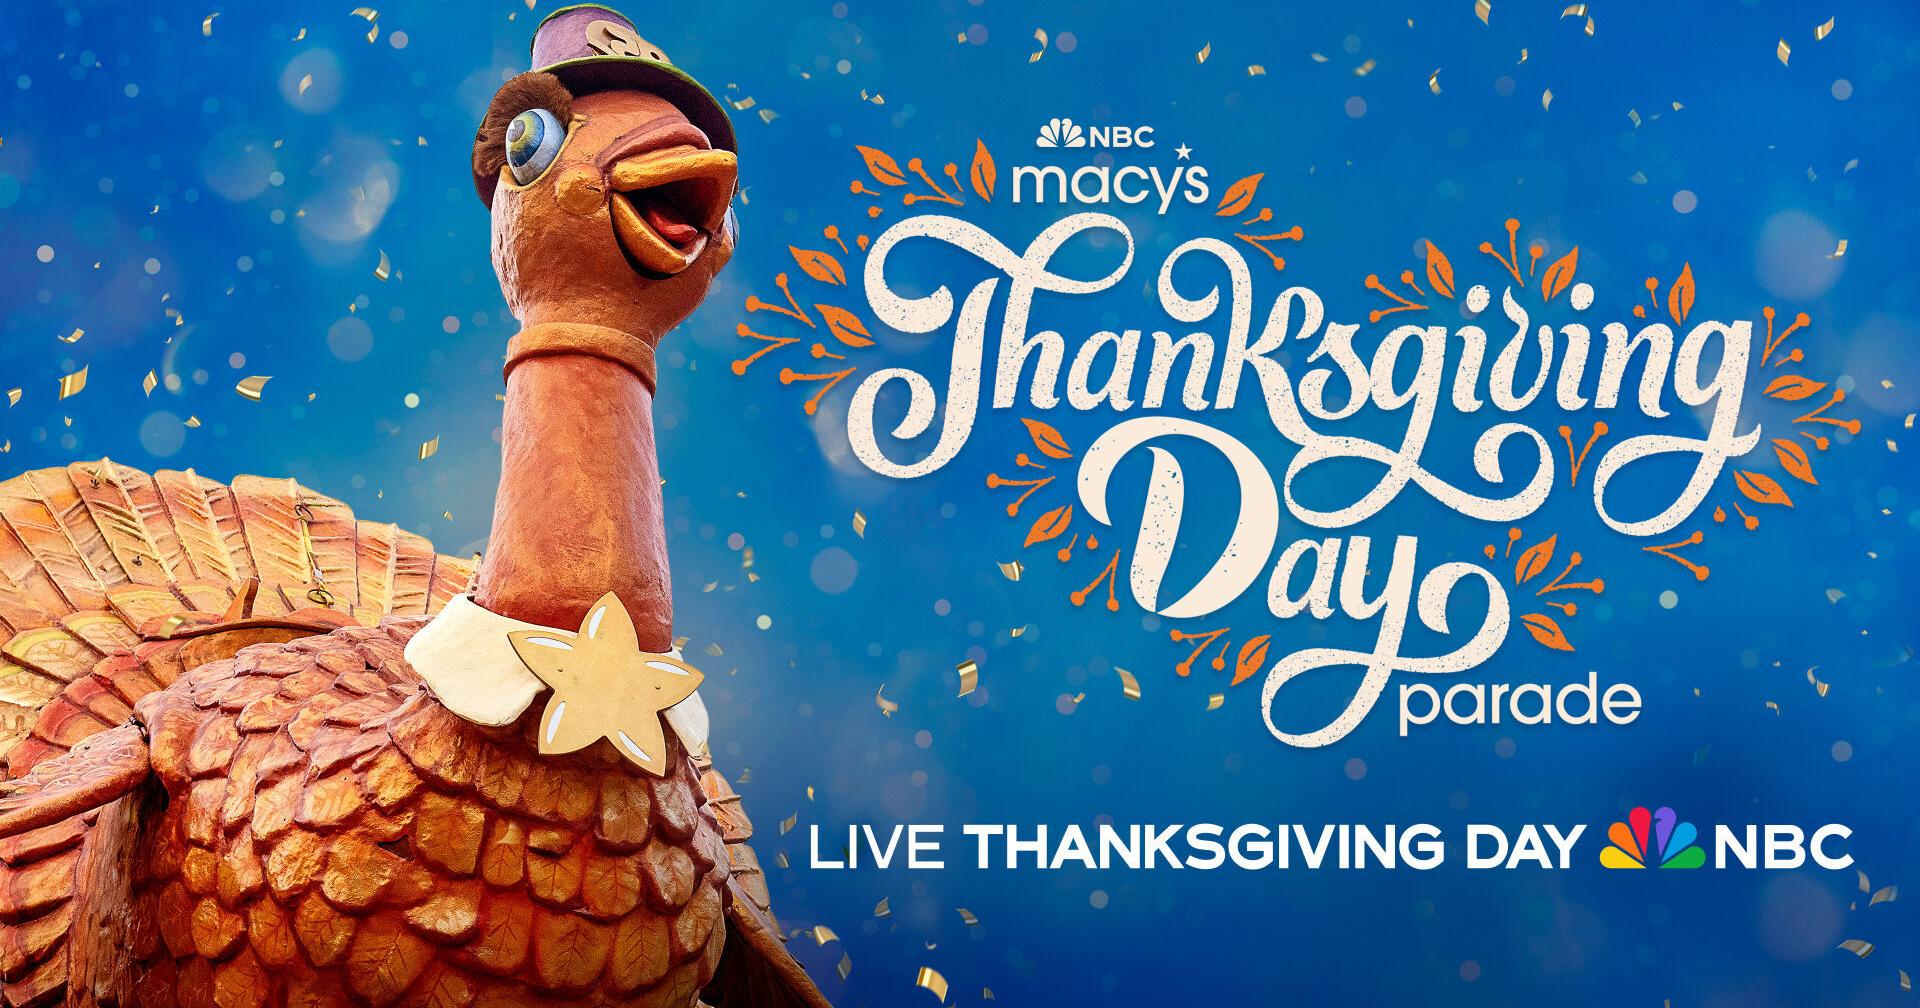 Cue the confetti! It’s almost time to celebrate with the 96th Macy’s Thanksgiving Day Parade Nov. 24 on NBC and Peacock